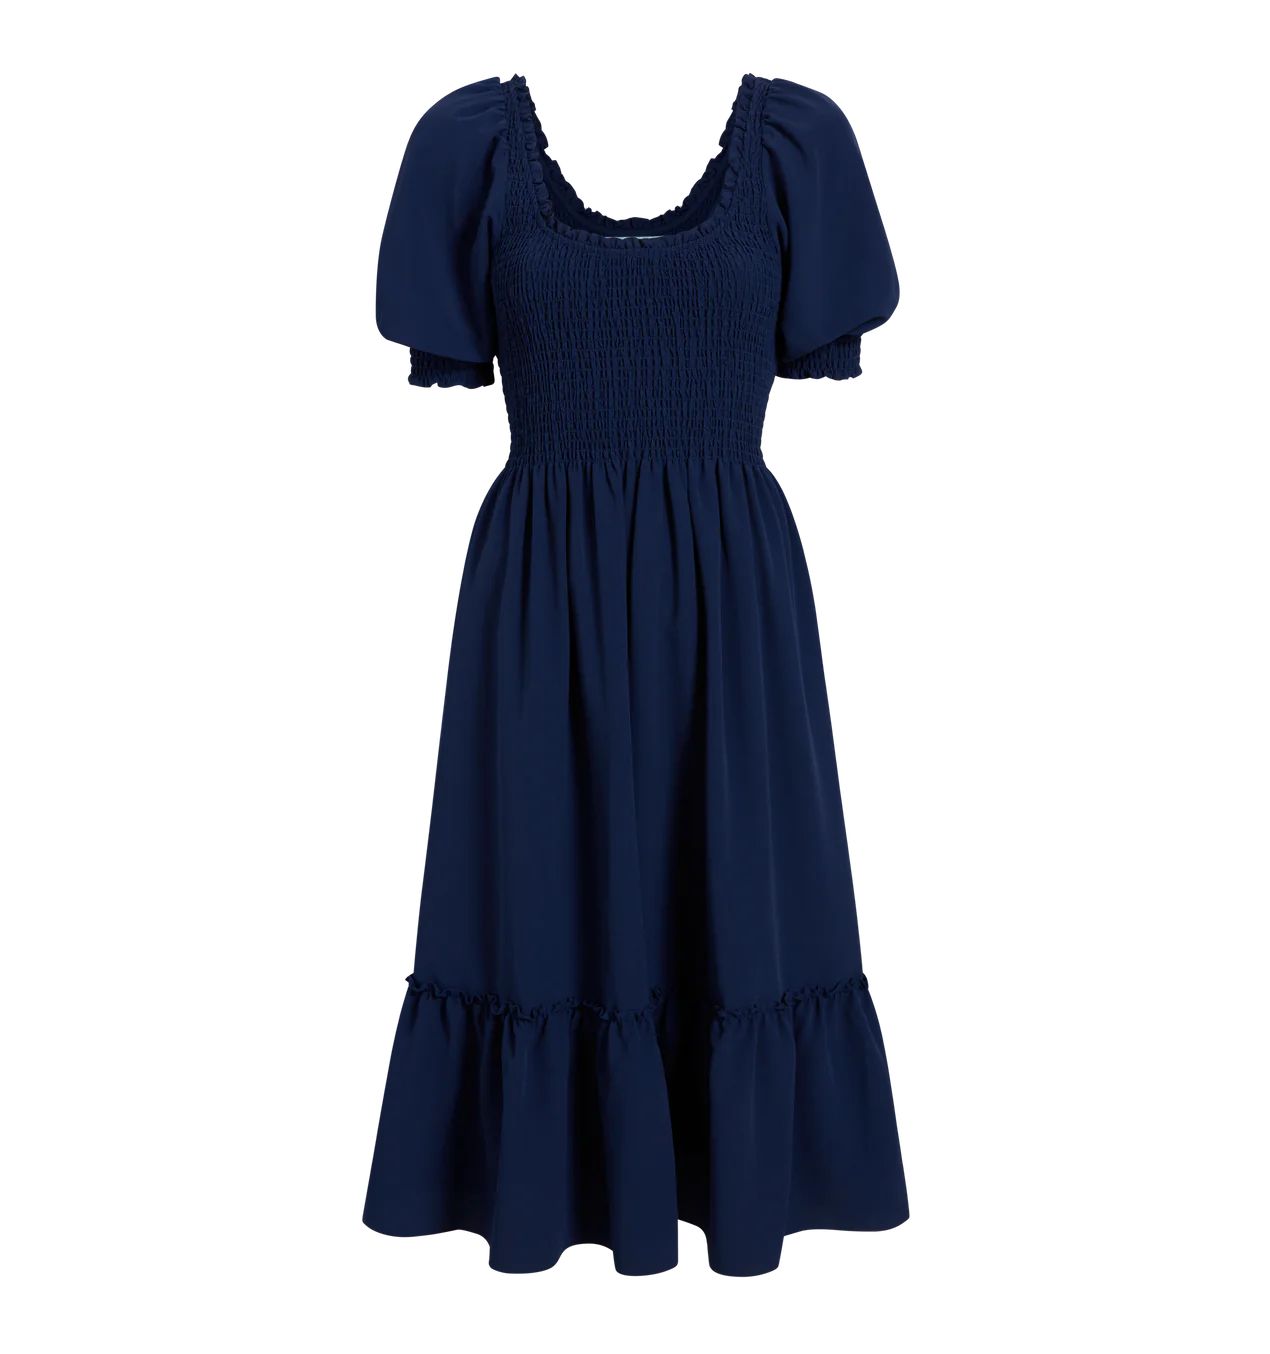 The Louisa Nap Dress - Navy Crepe | Hill House Home